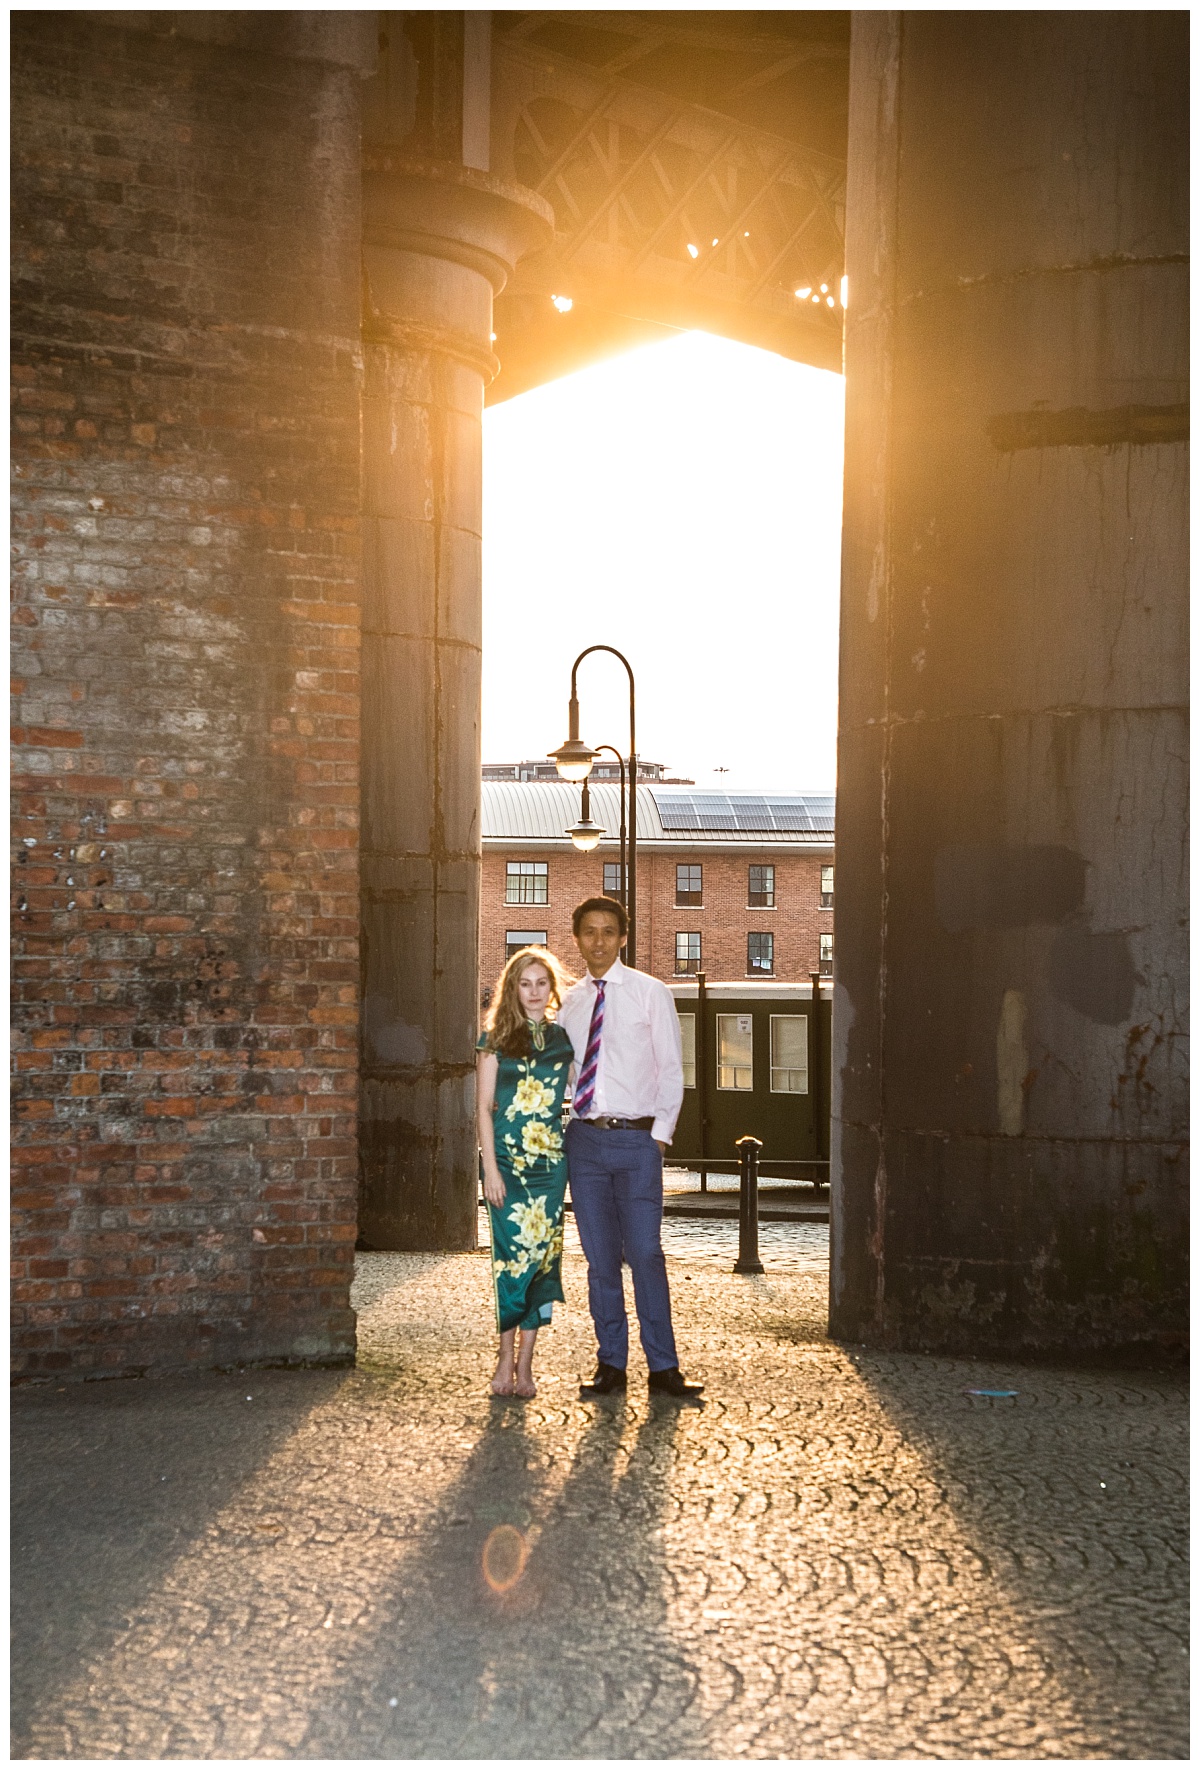 Wedding Photography Manchester - Stephanie and James's Pre wedding Shoot in Castlefield 22